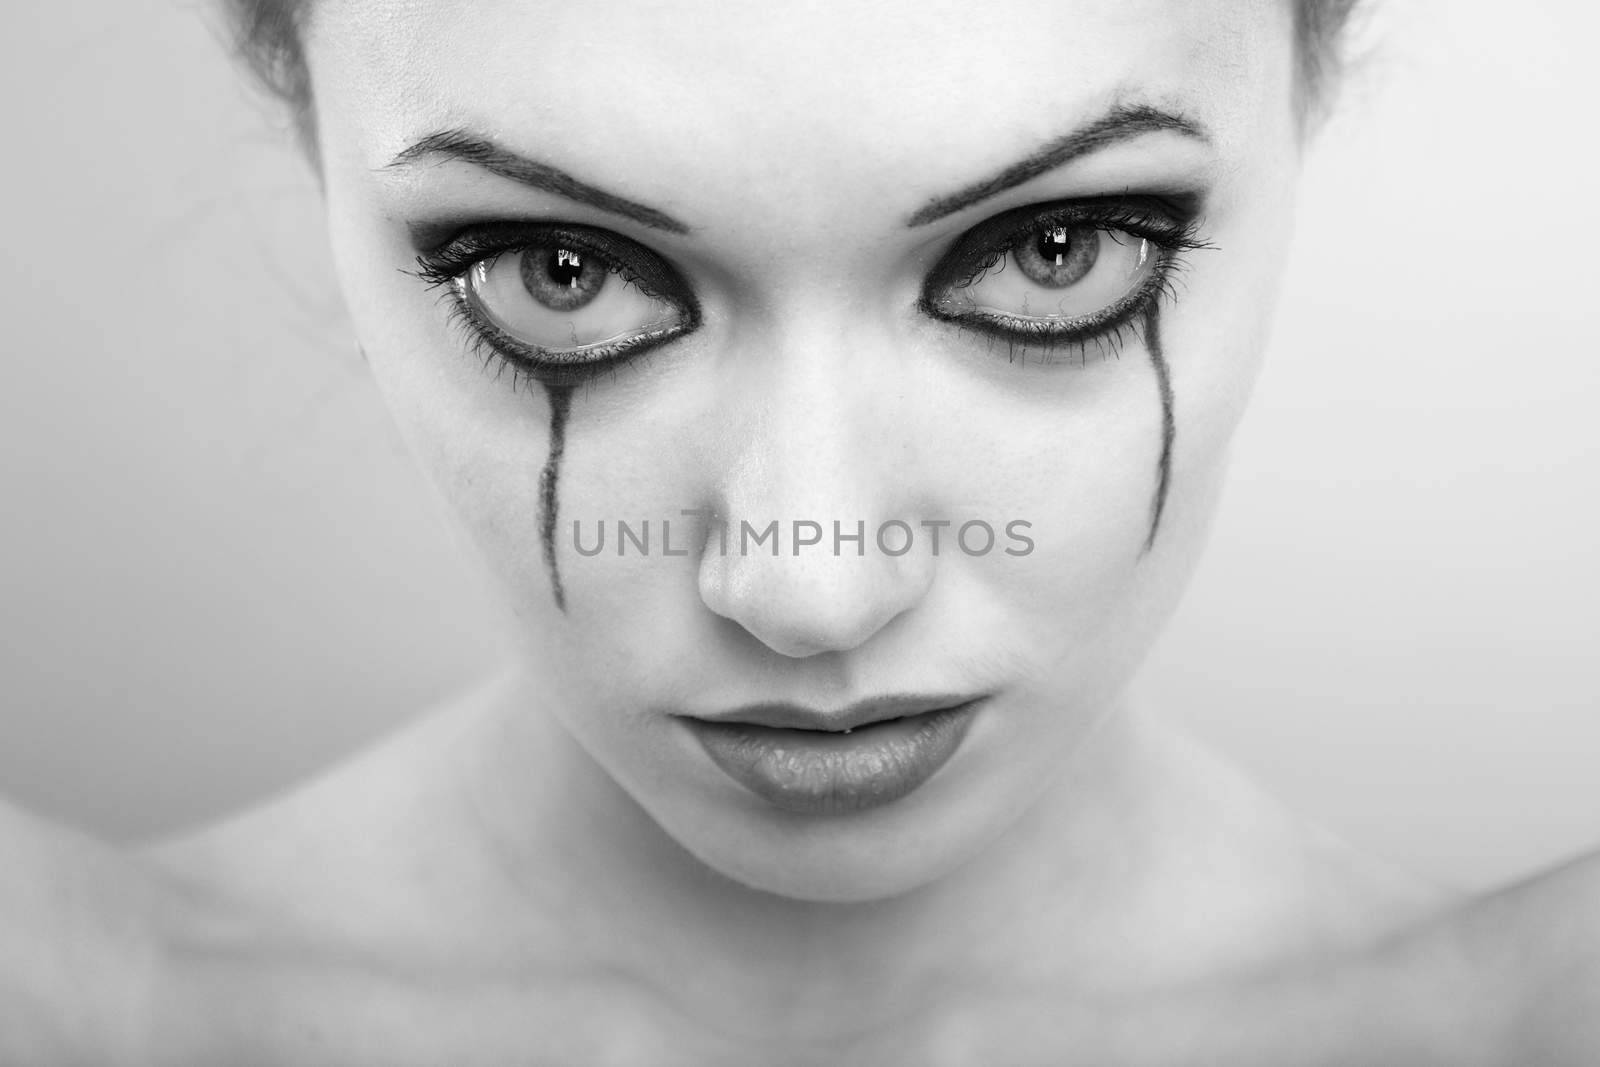 Close-up portrait of the crying woman with washed out mascara. Monochrome photo